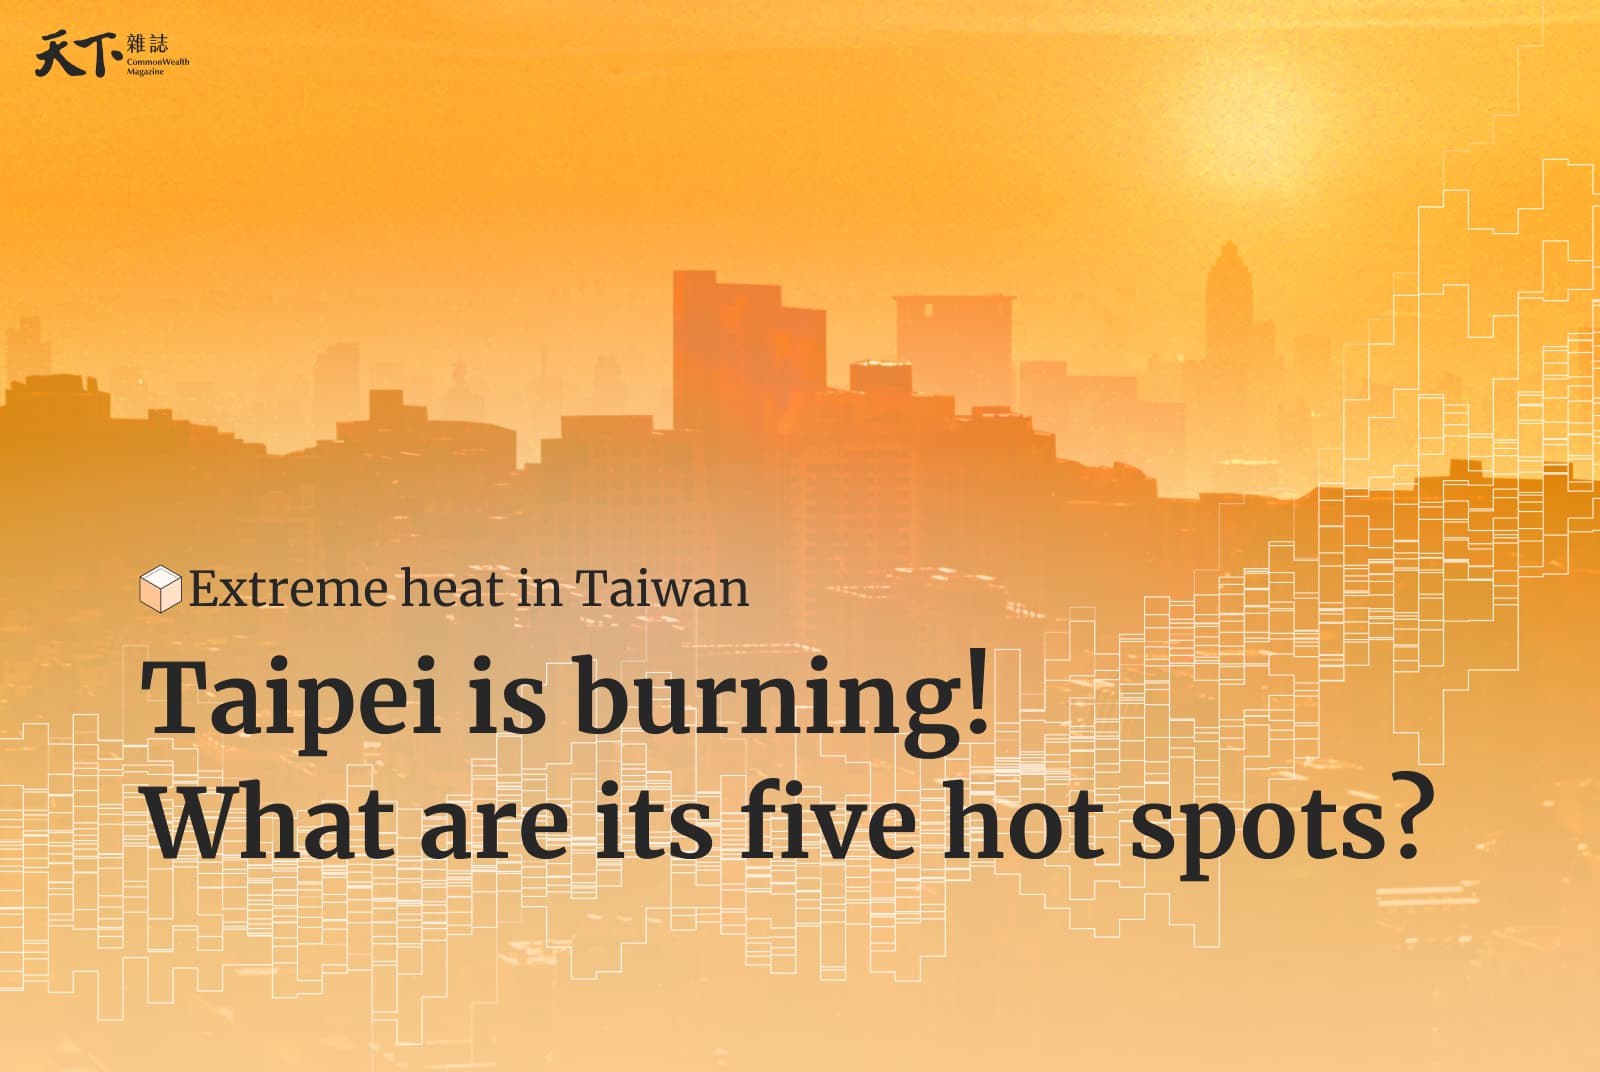 Taipei is burning! Where are the five hot spots